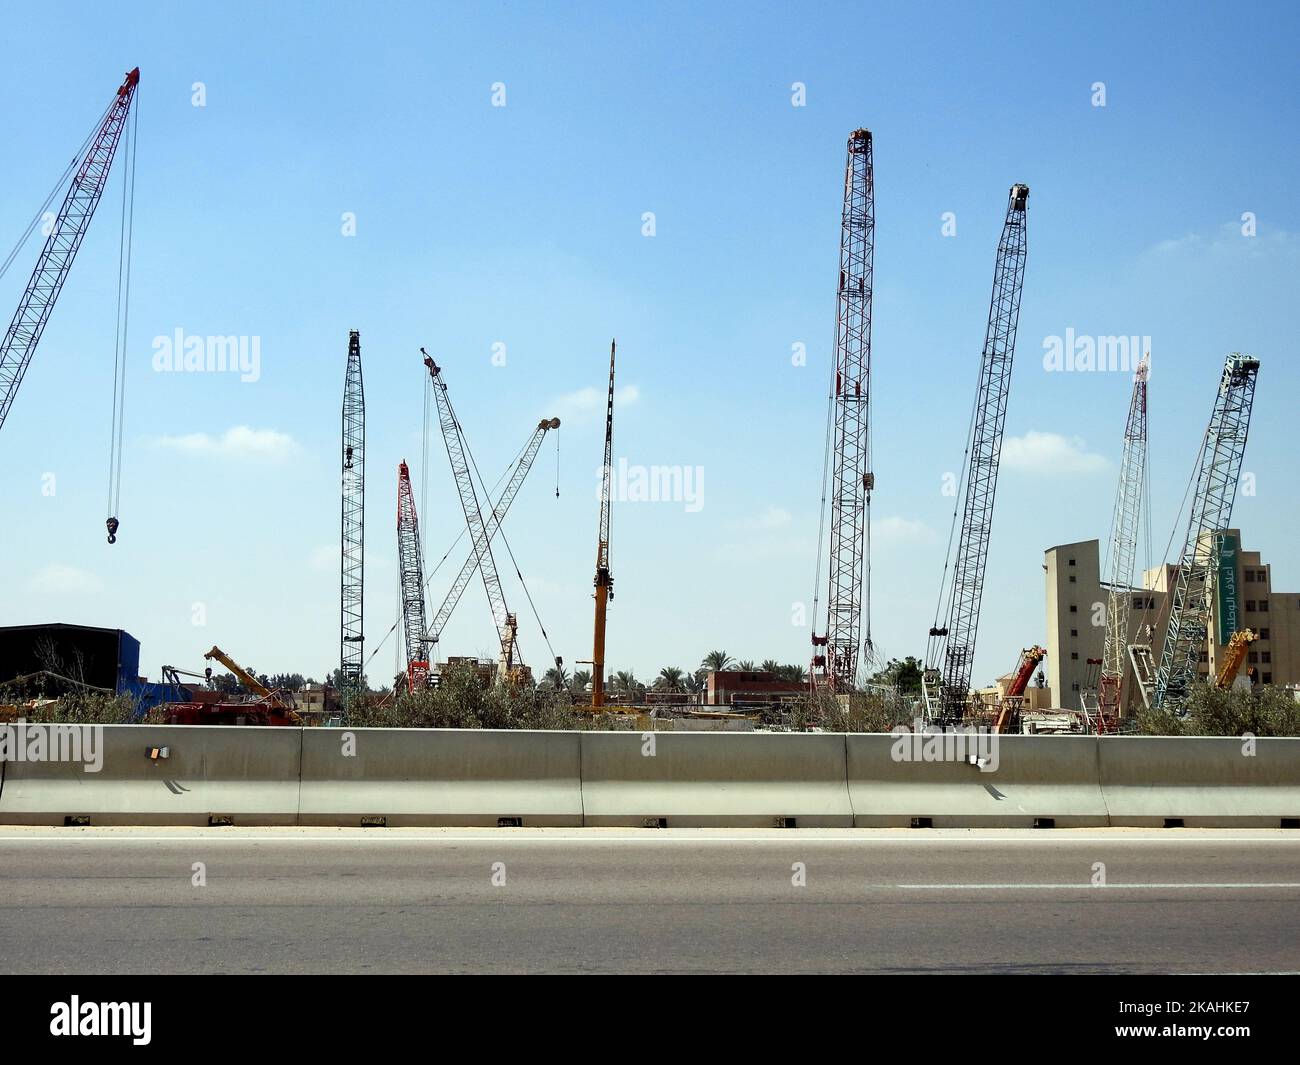 Alexandria, Egypt, September 9 2022: many overhead cranes at the site of poultry chicken farm and factory for products providing efficient and conveni Stock Photo